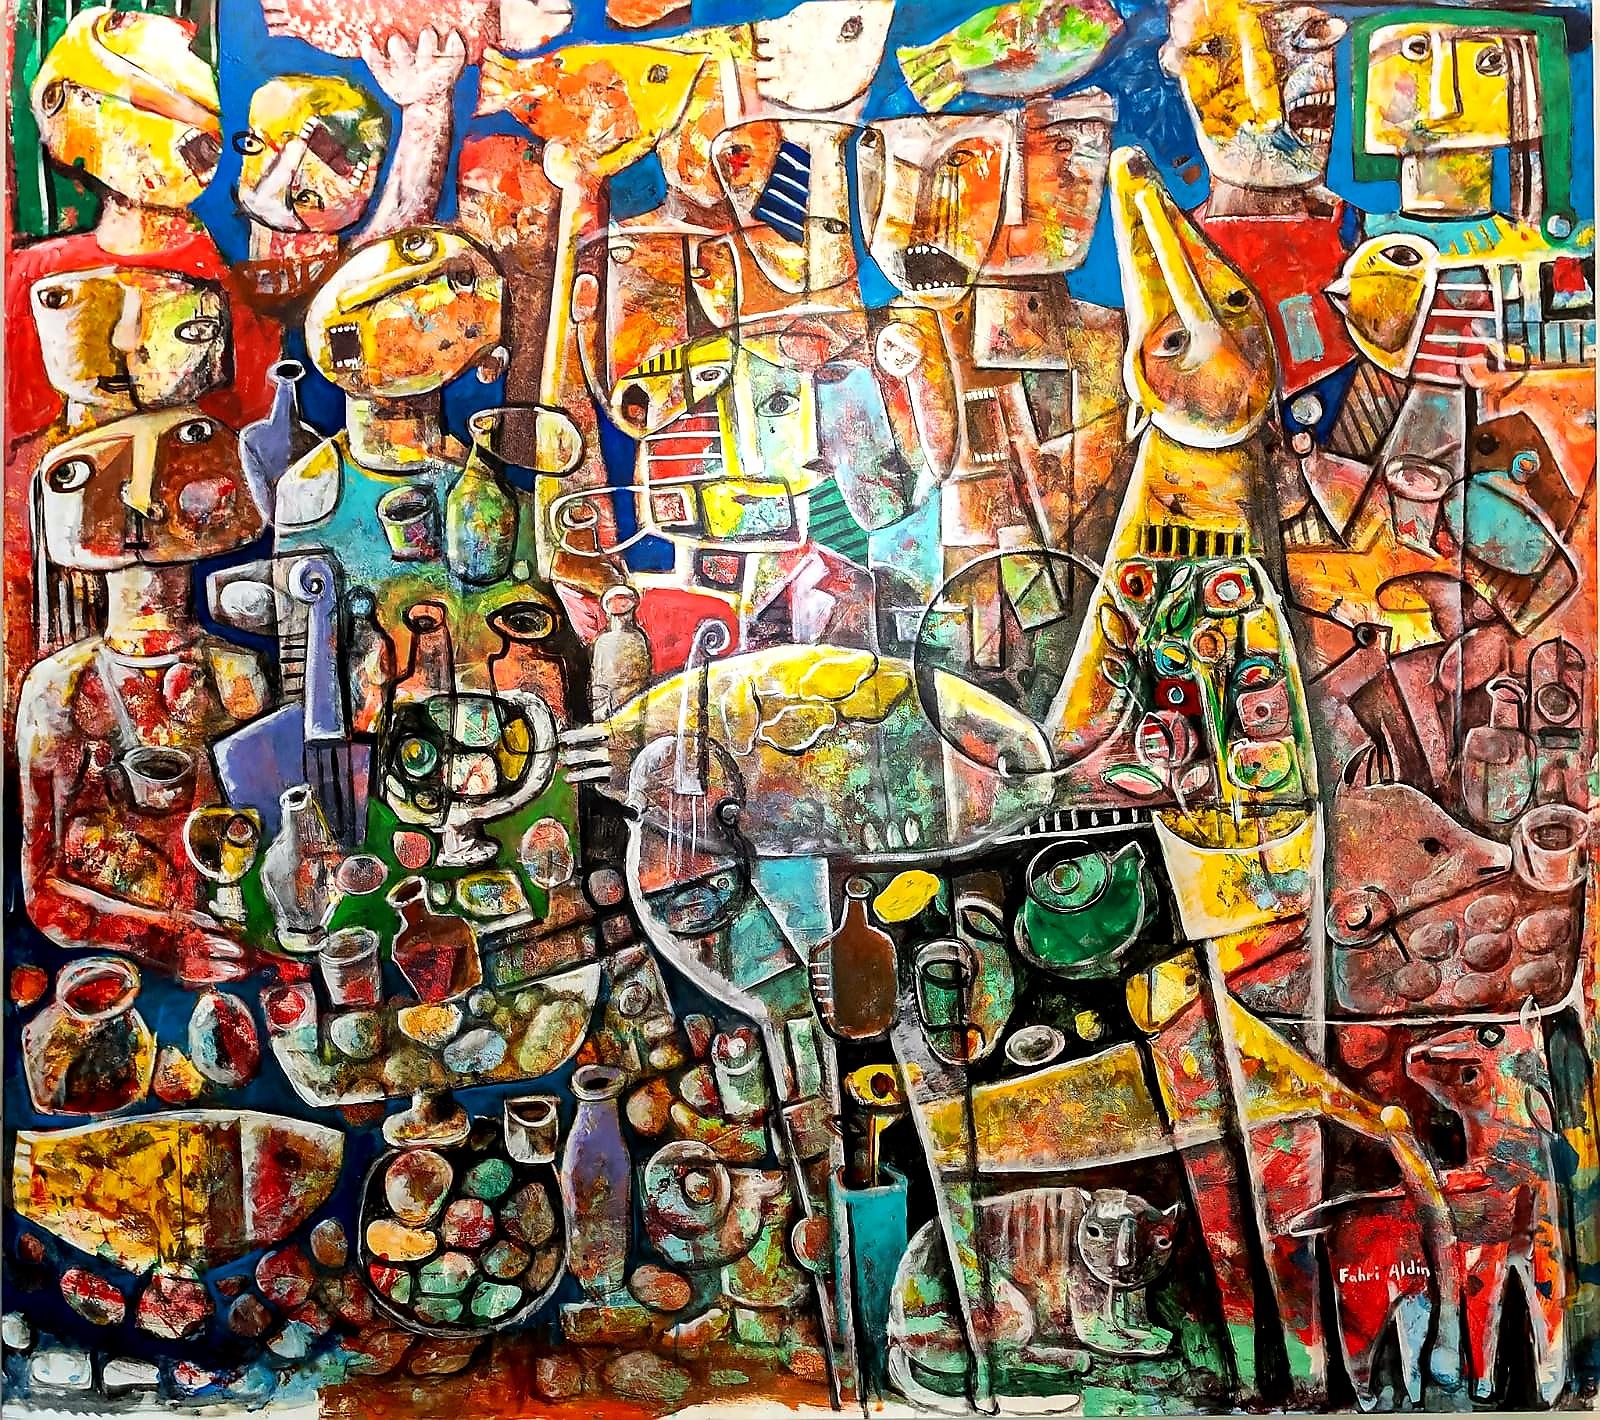 'Feast and Chaos'  Large Original Painting on Canvas by Artist Fahri Aldin- 1950